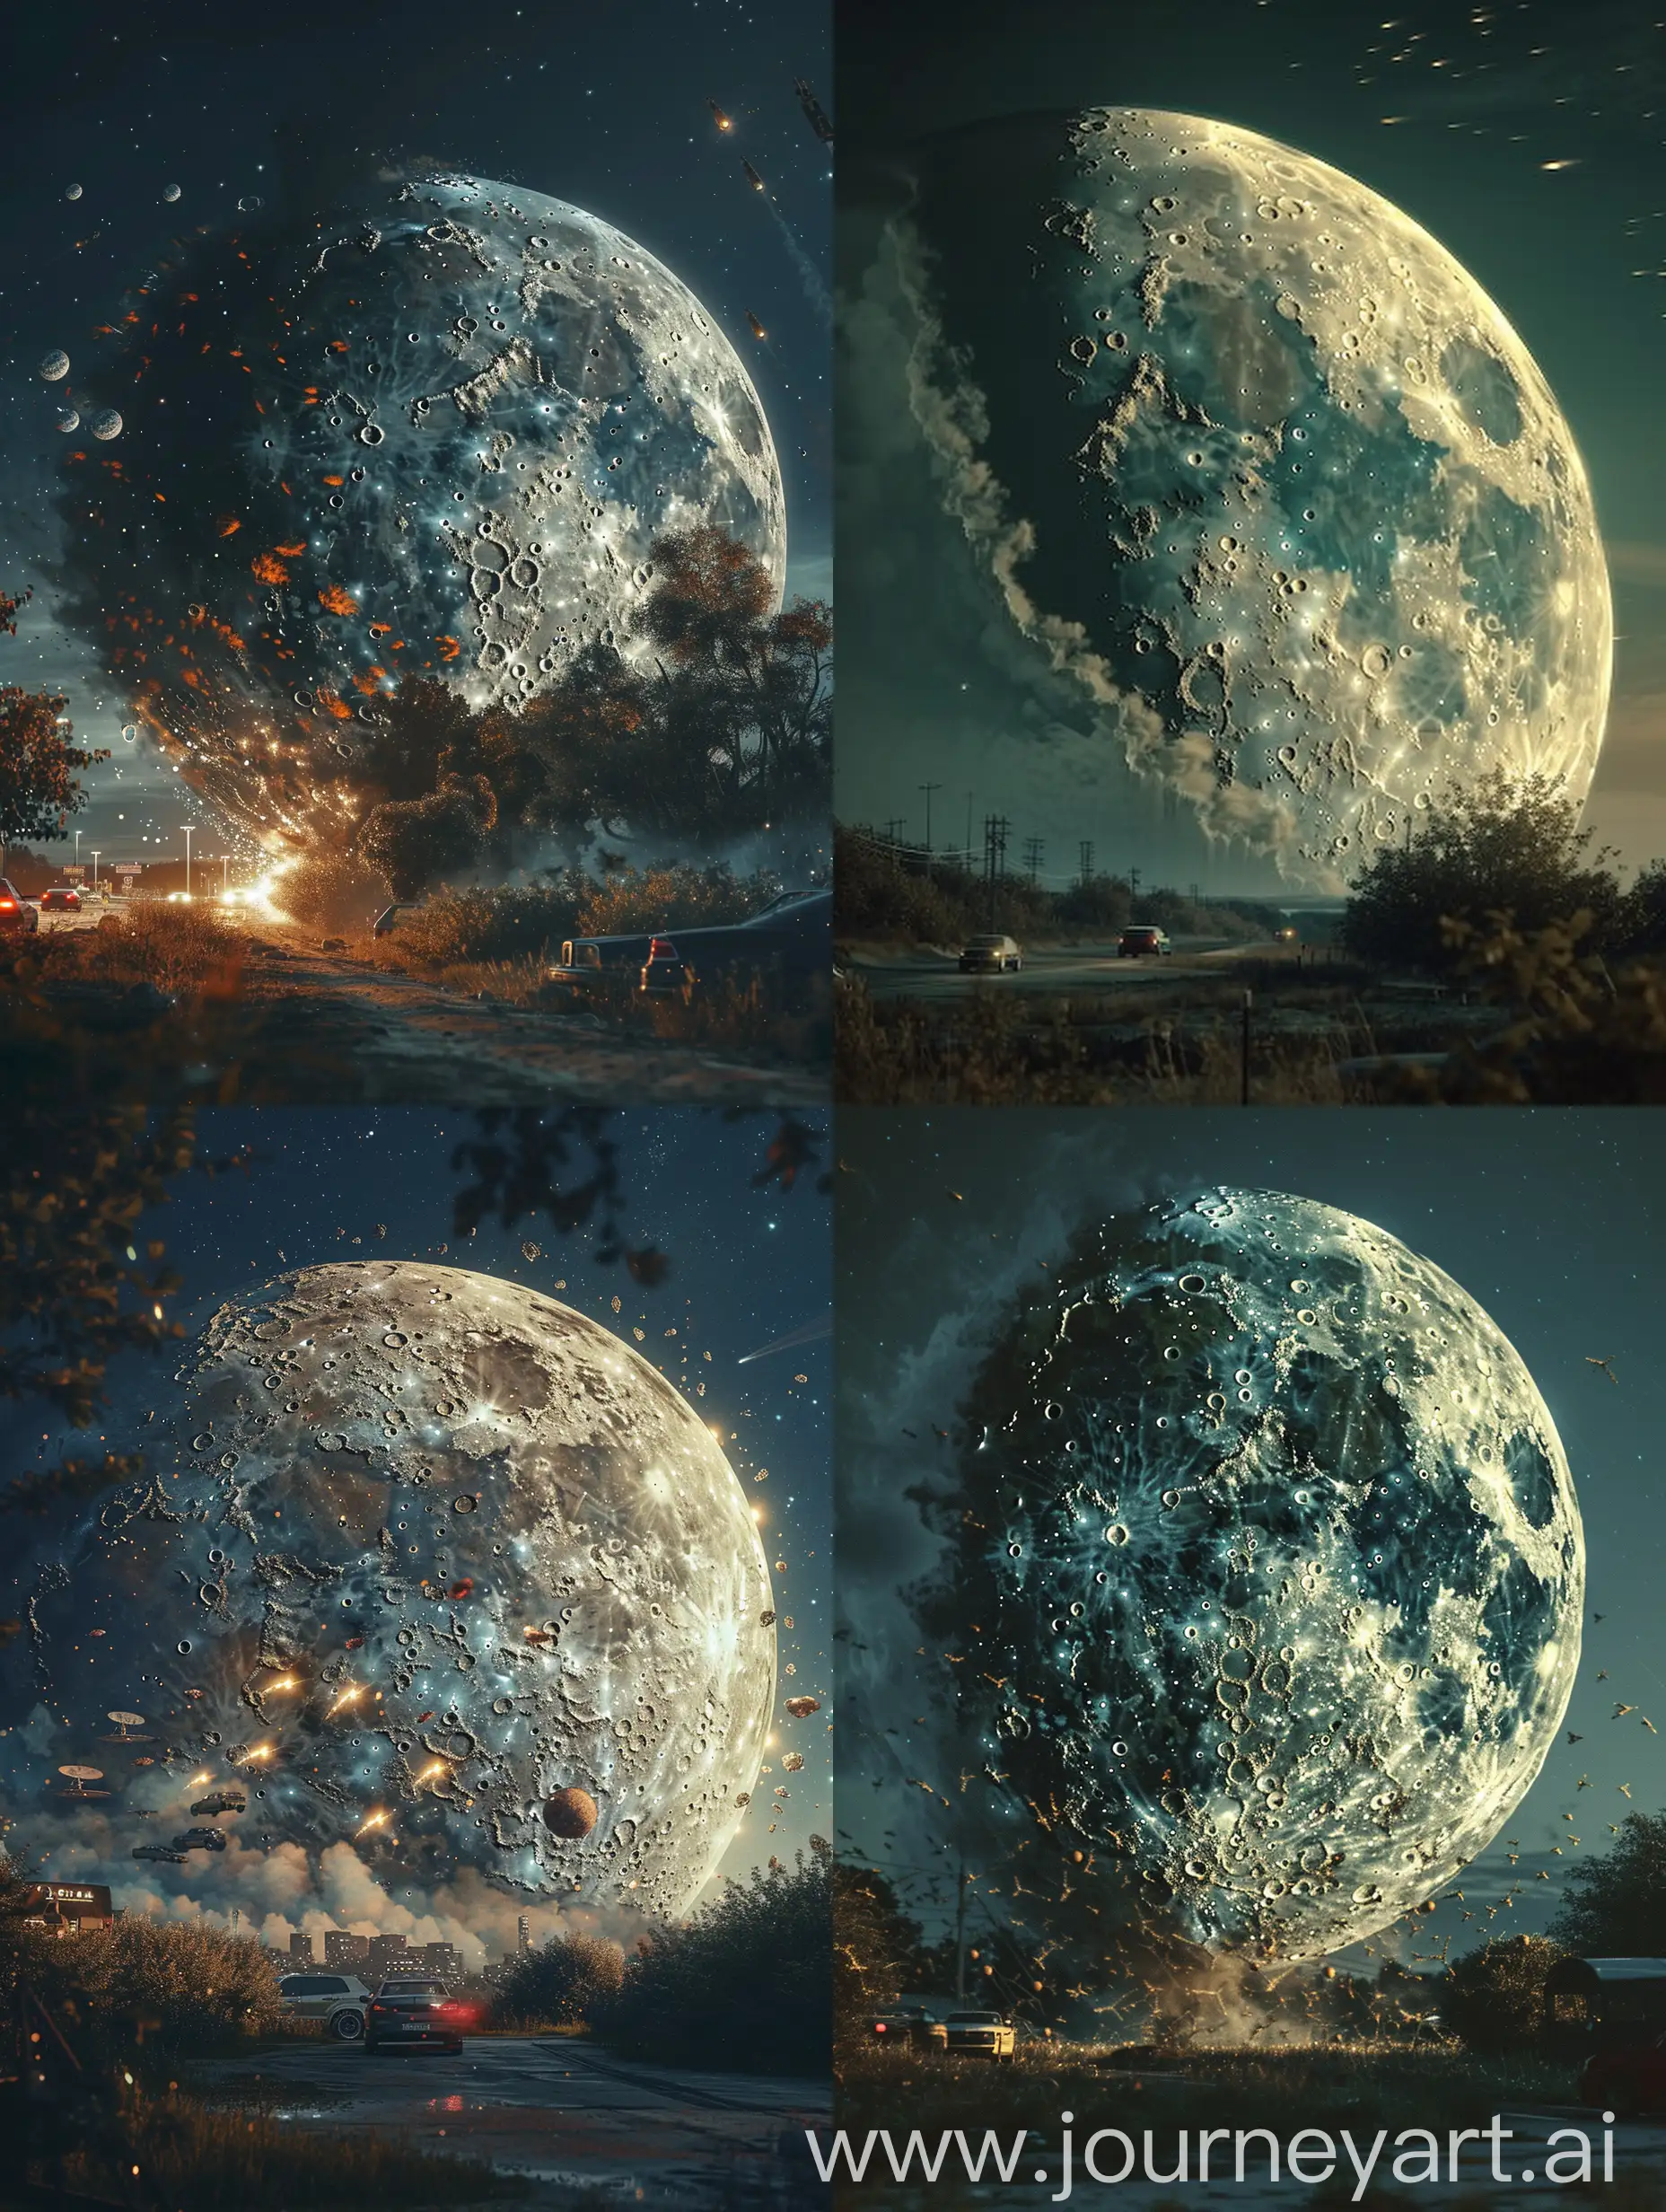 Moons-Descent-Cinematic-Nostalgic-Horror-Shot-with-Satellites-and-Cars